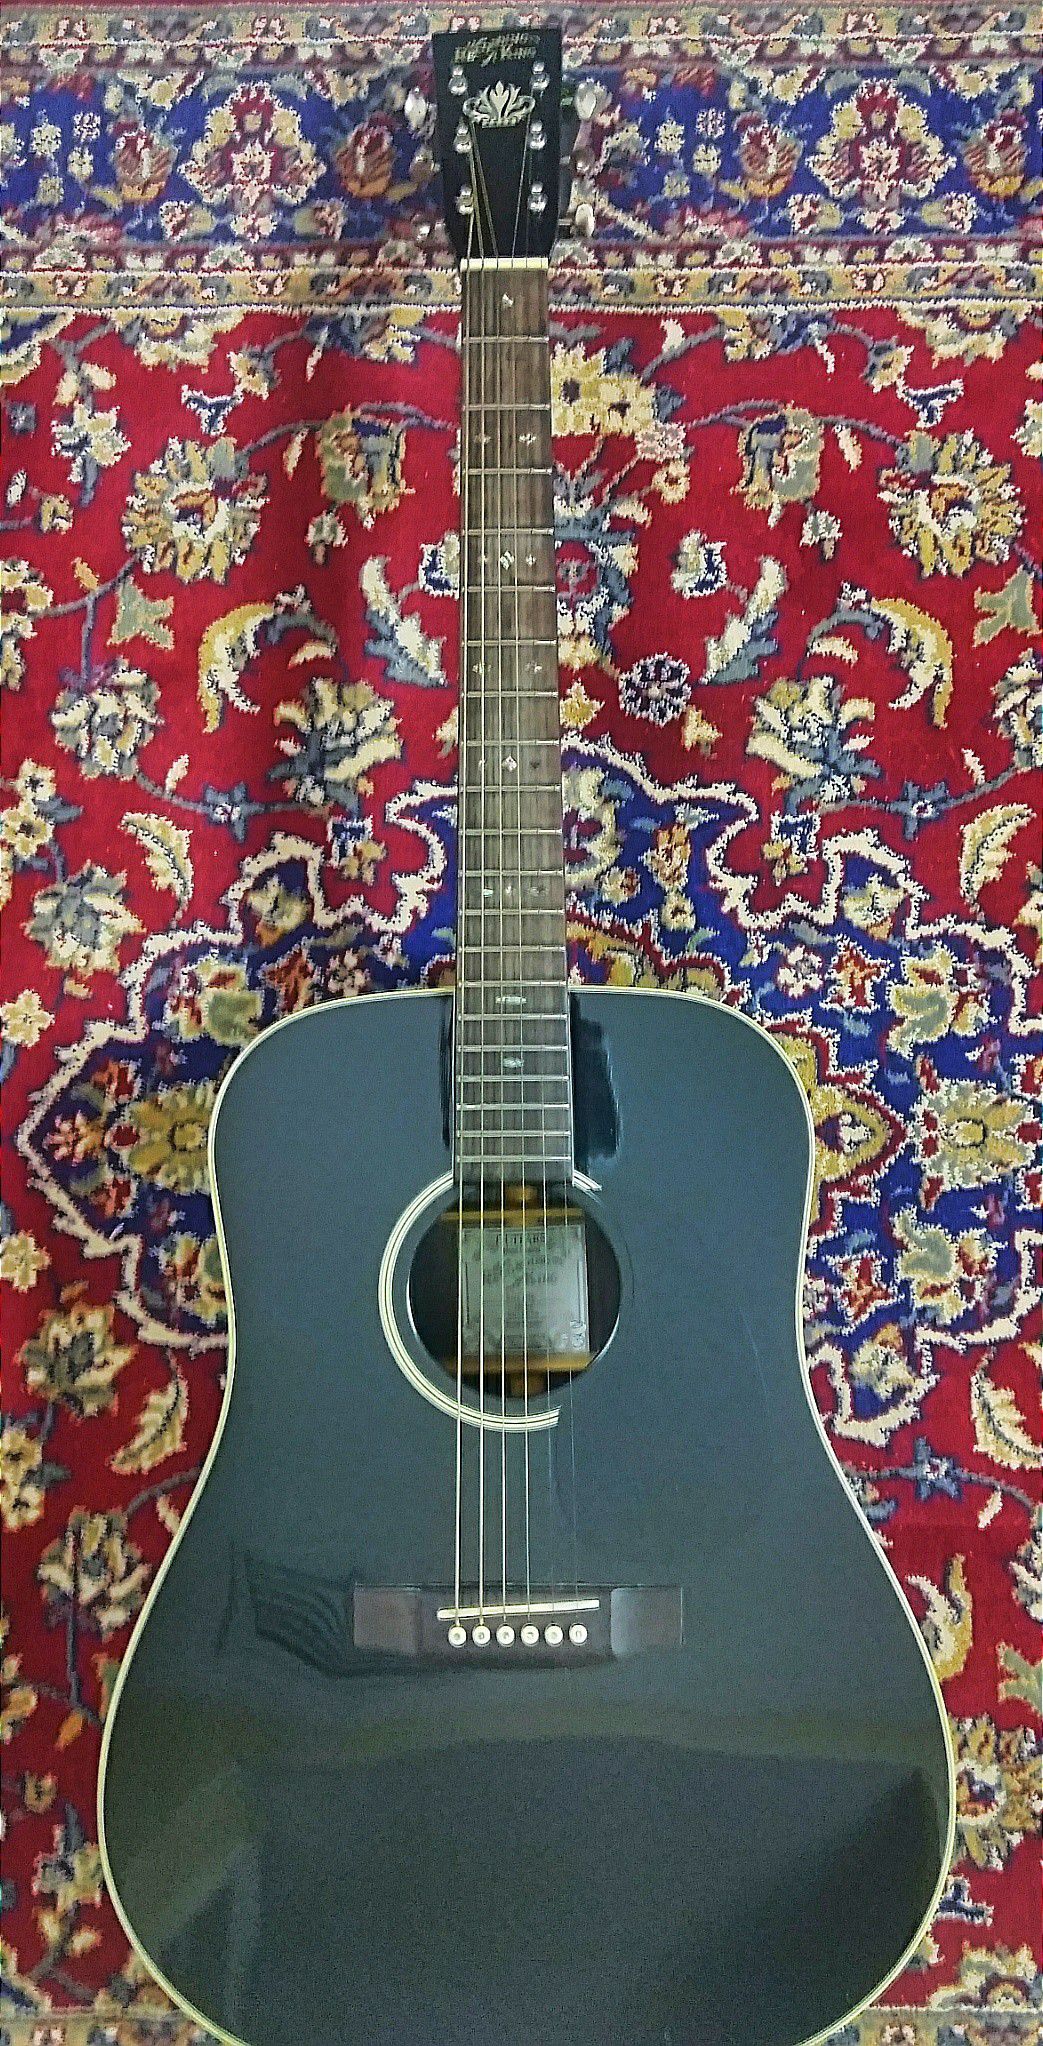 Recording king acoustic guitar with case ! $200 or best offer !;